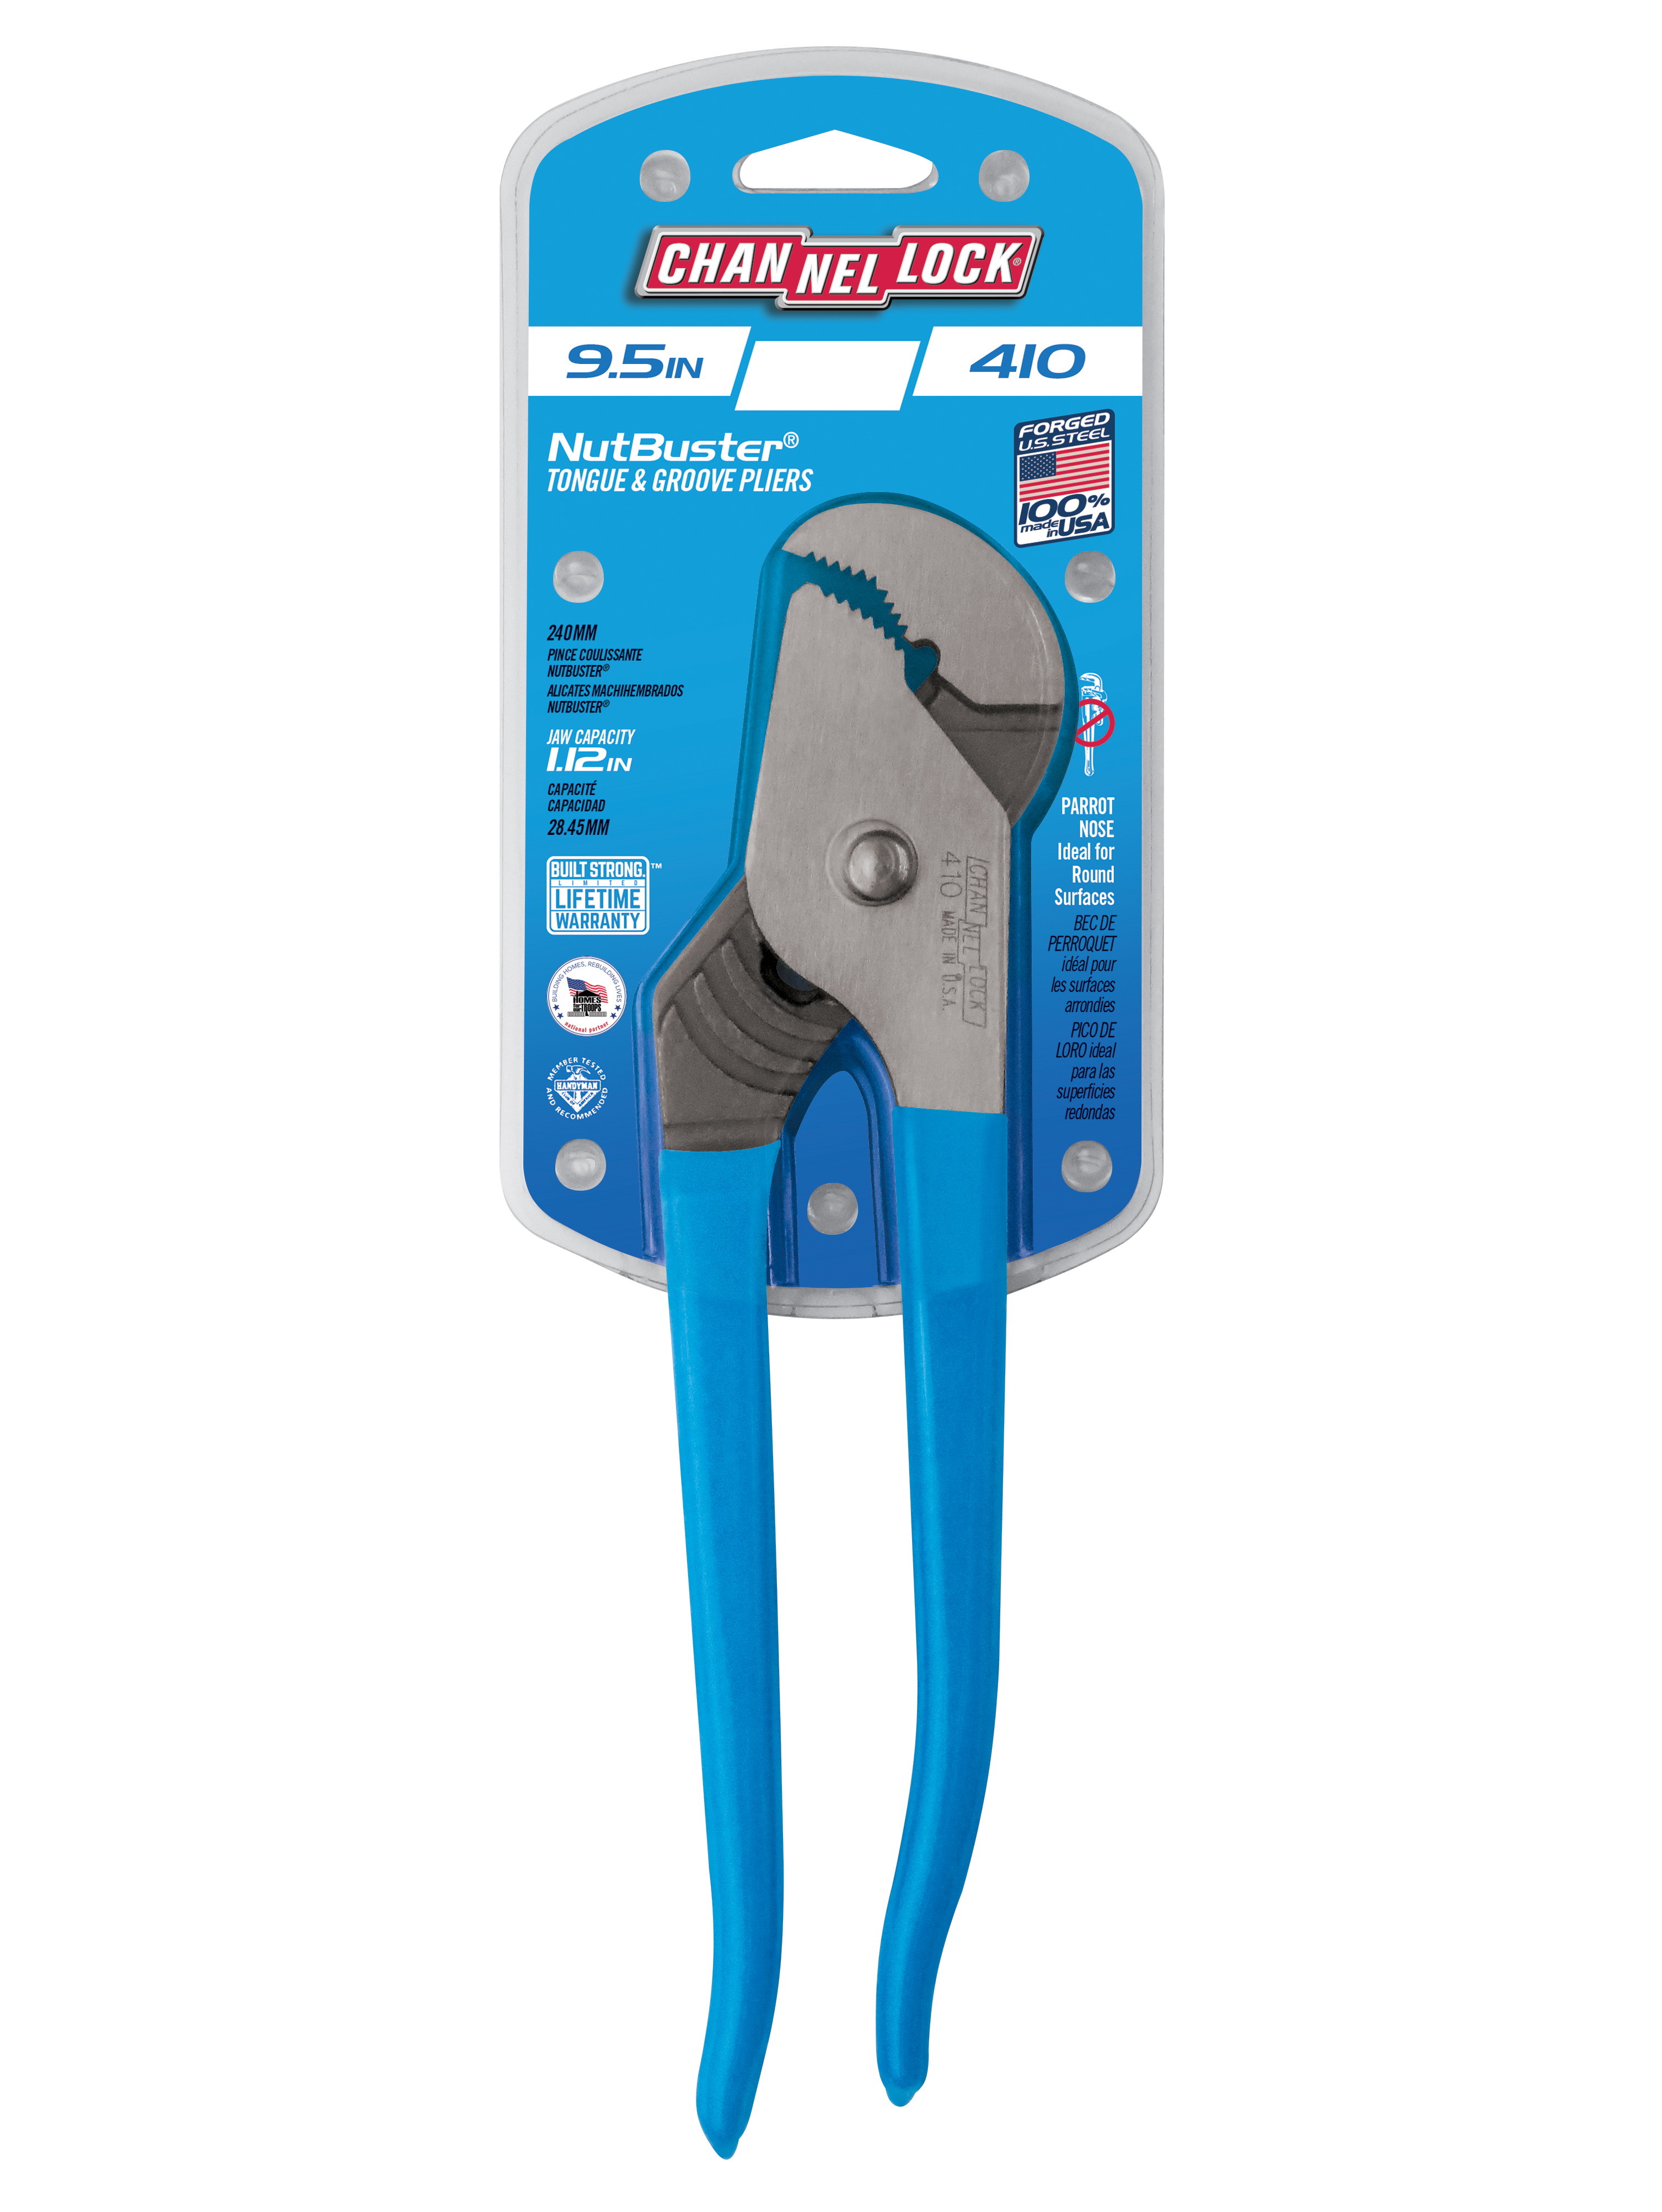 CHANNELLOCK 410 Tongue and Groove Plier, 9-1/2 in OAL, 1.12 in Jaw Opening, Blue Handle, Cushion-Grip Handle